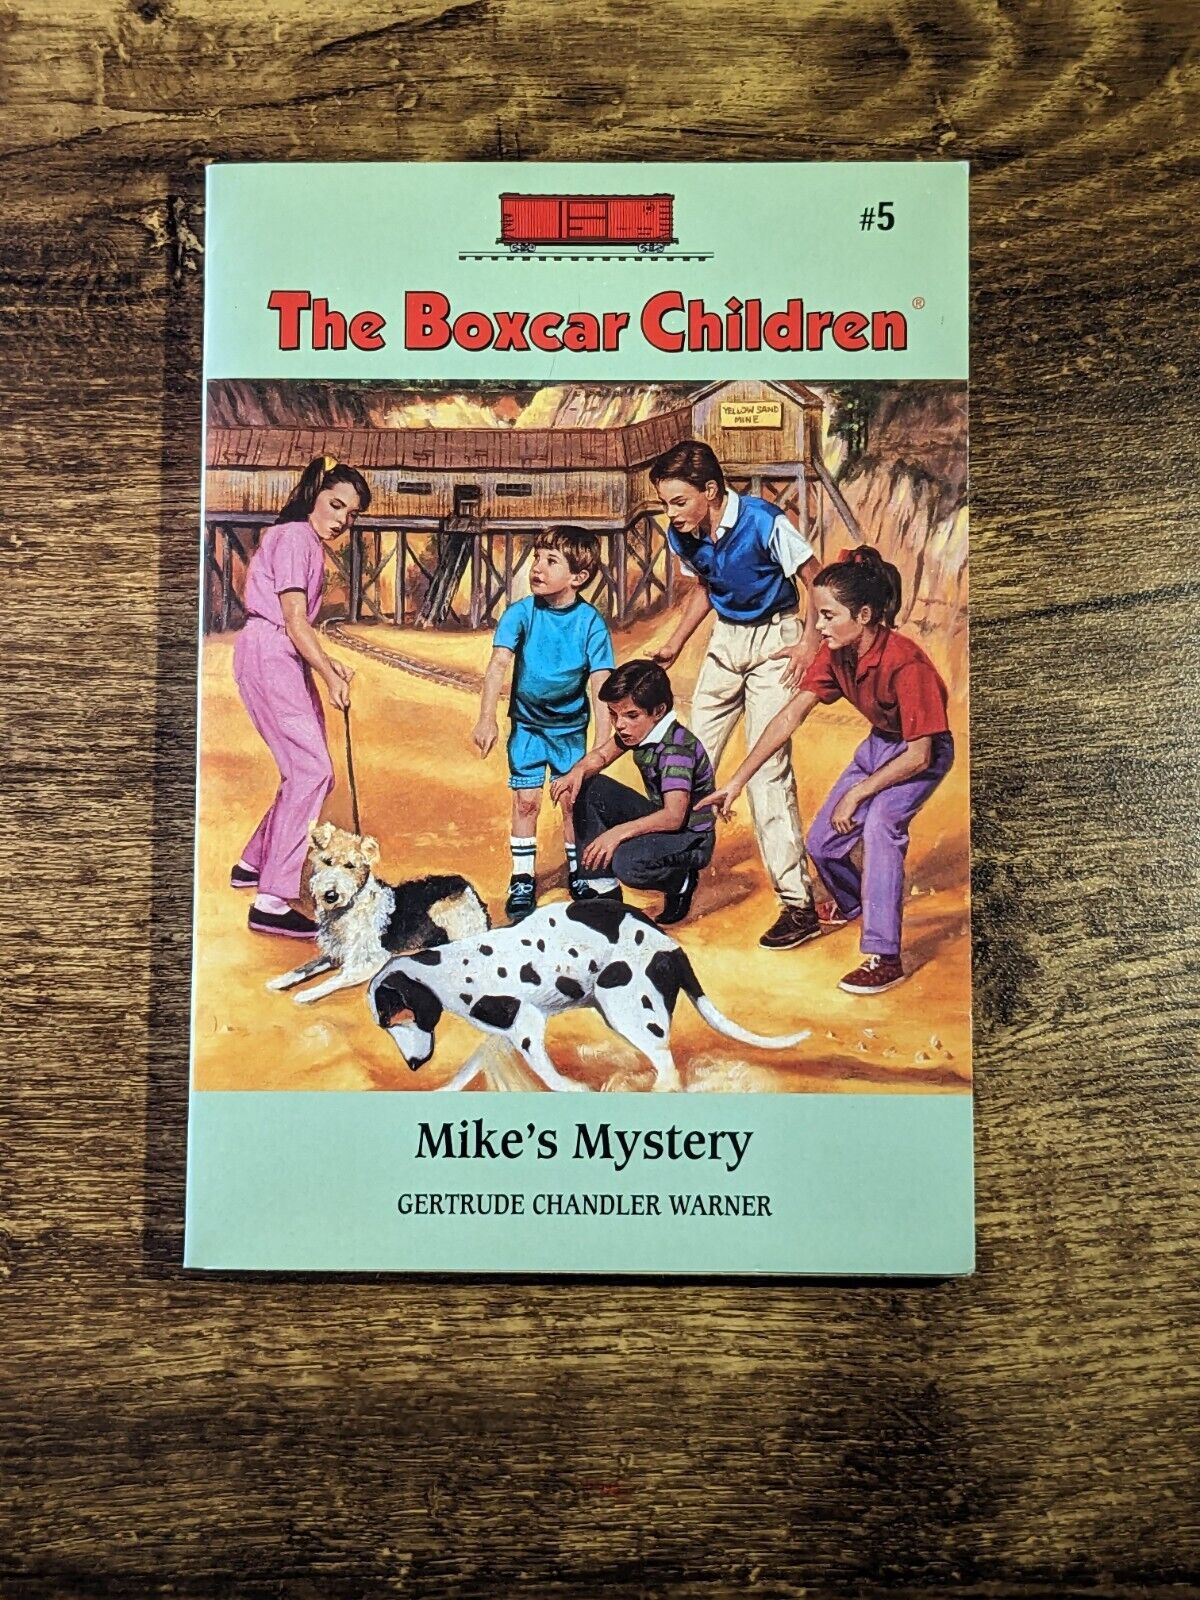 Mike's Mystery (The Boxcar Children Mysteries) by Gertrude Chandler Warner - Asylum Books